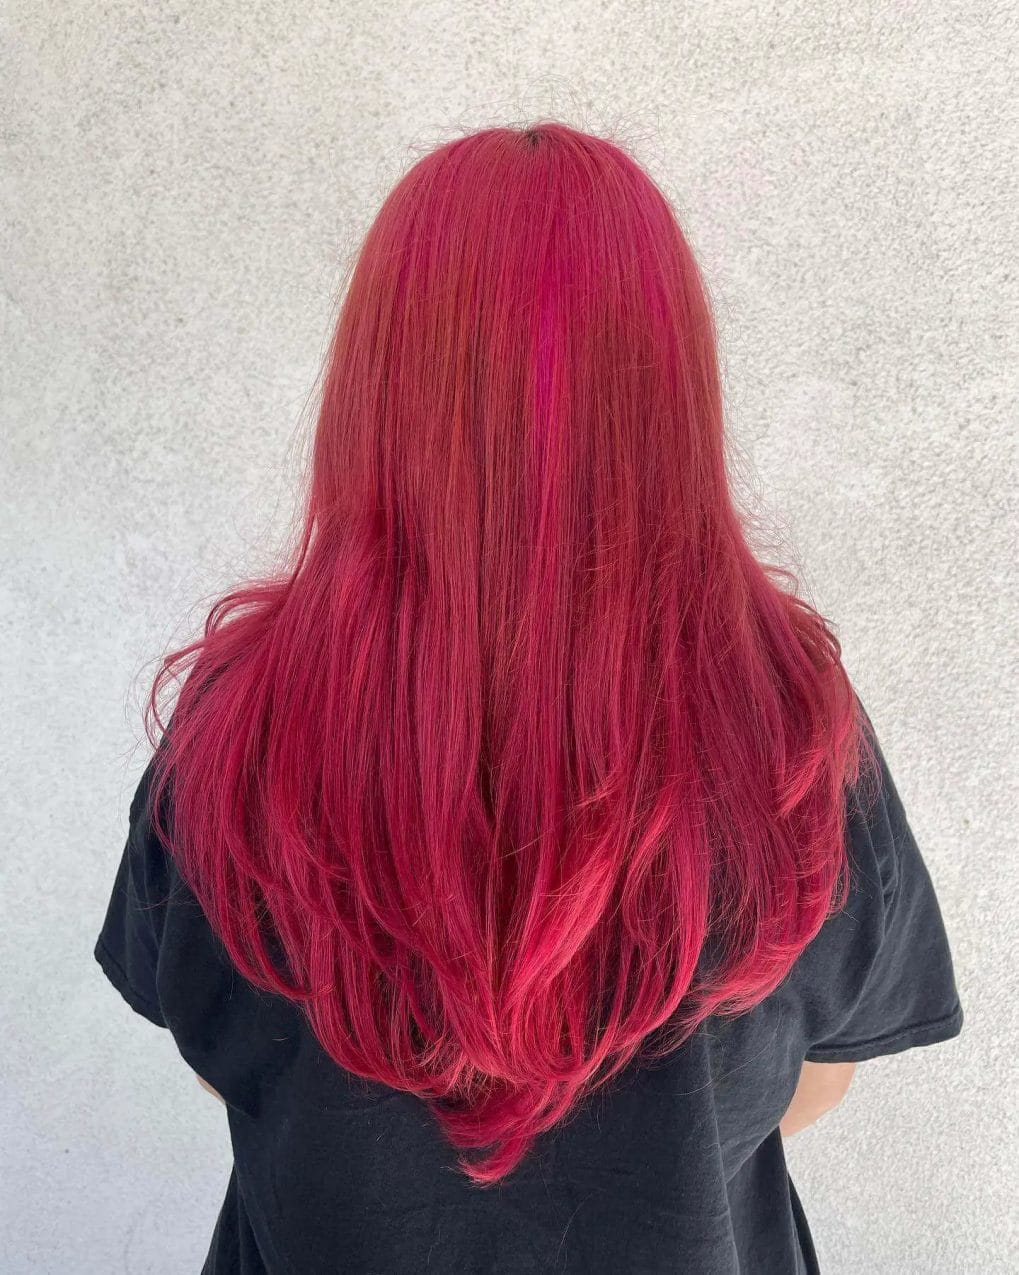 Bright red hair with a pronounced V-shaped cut for a bold look.